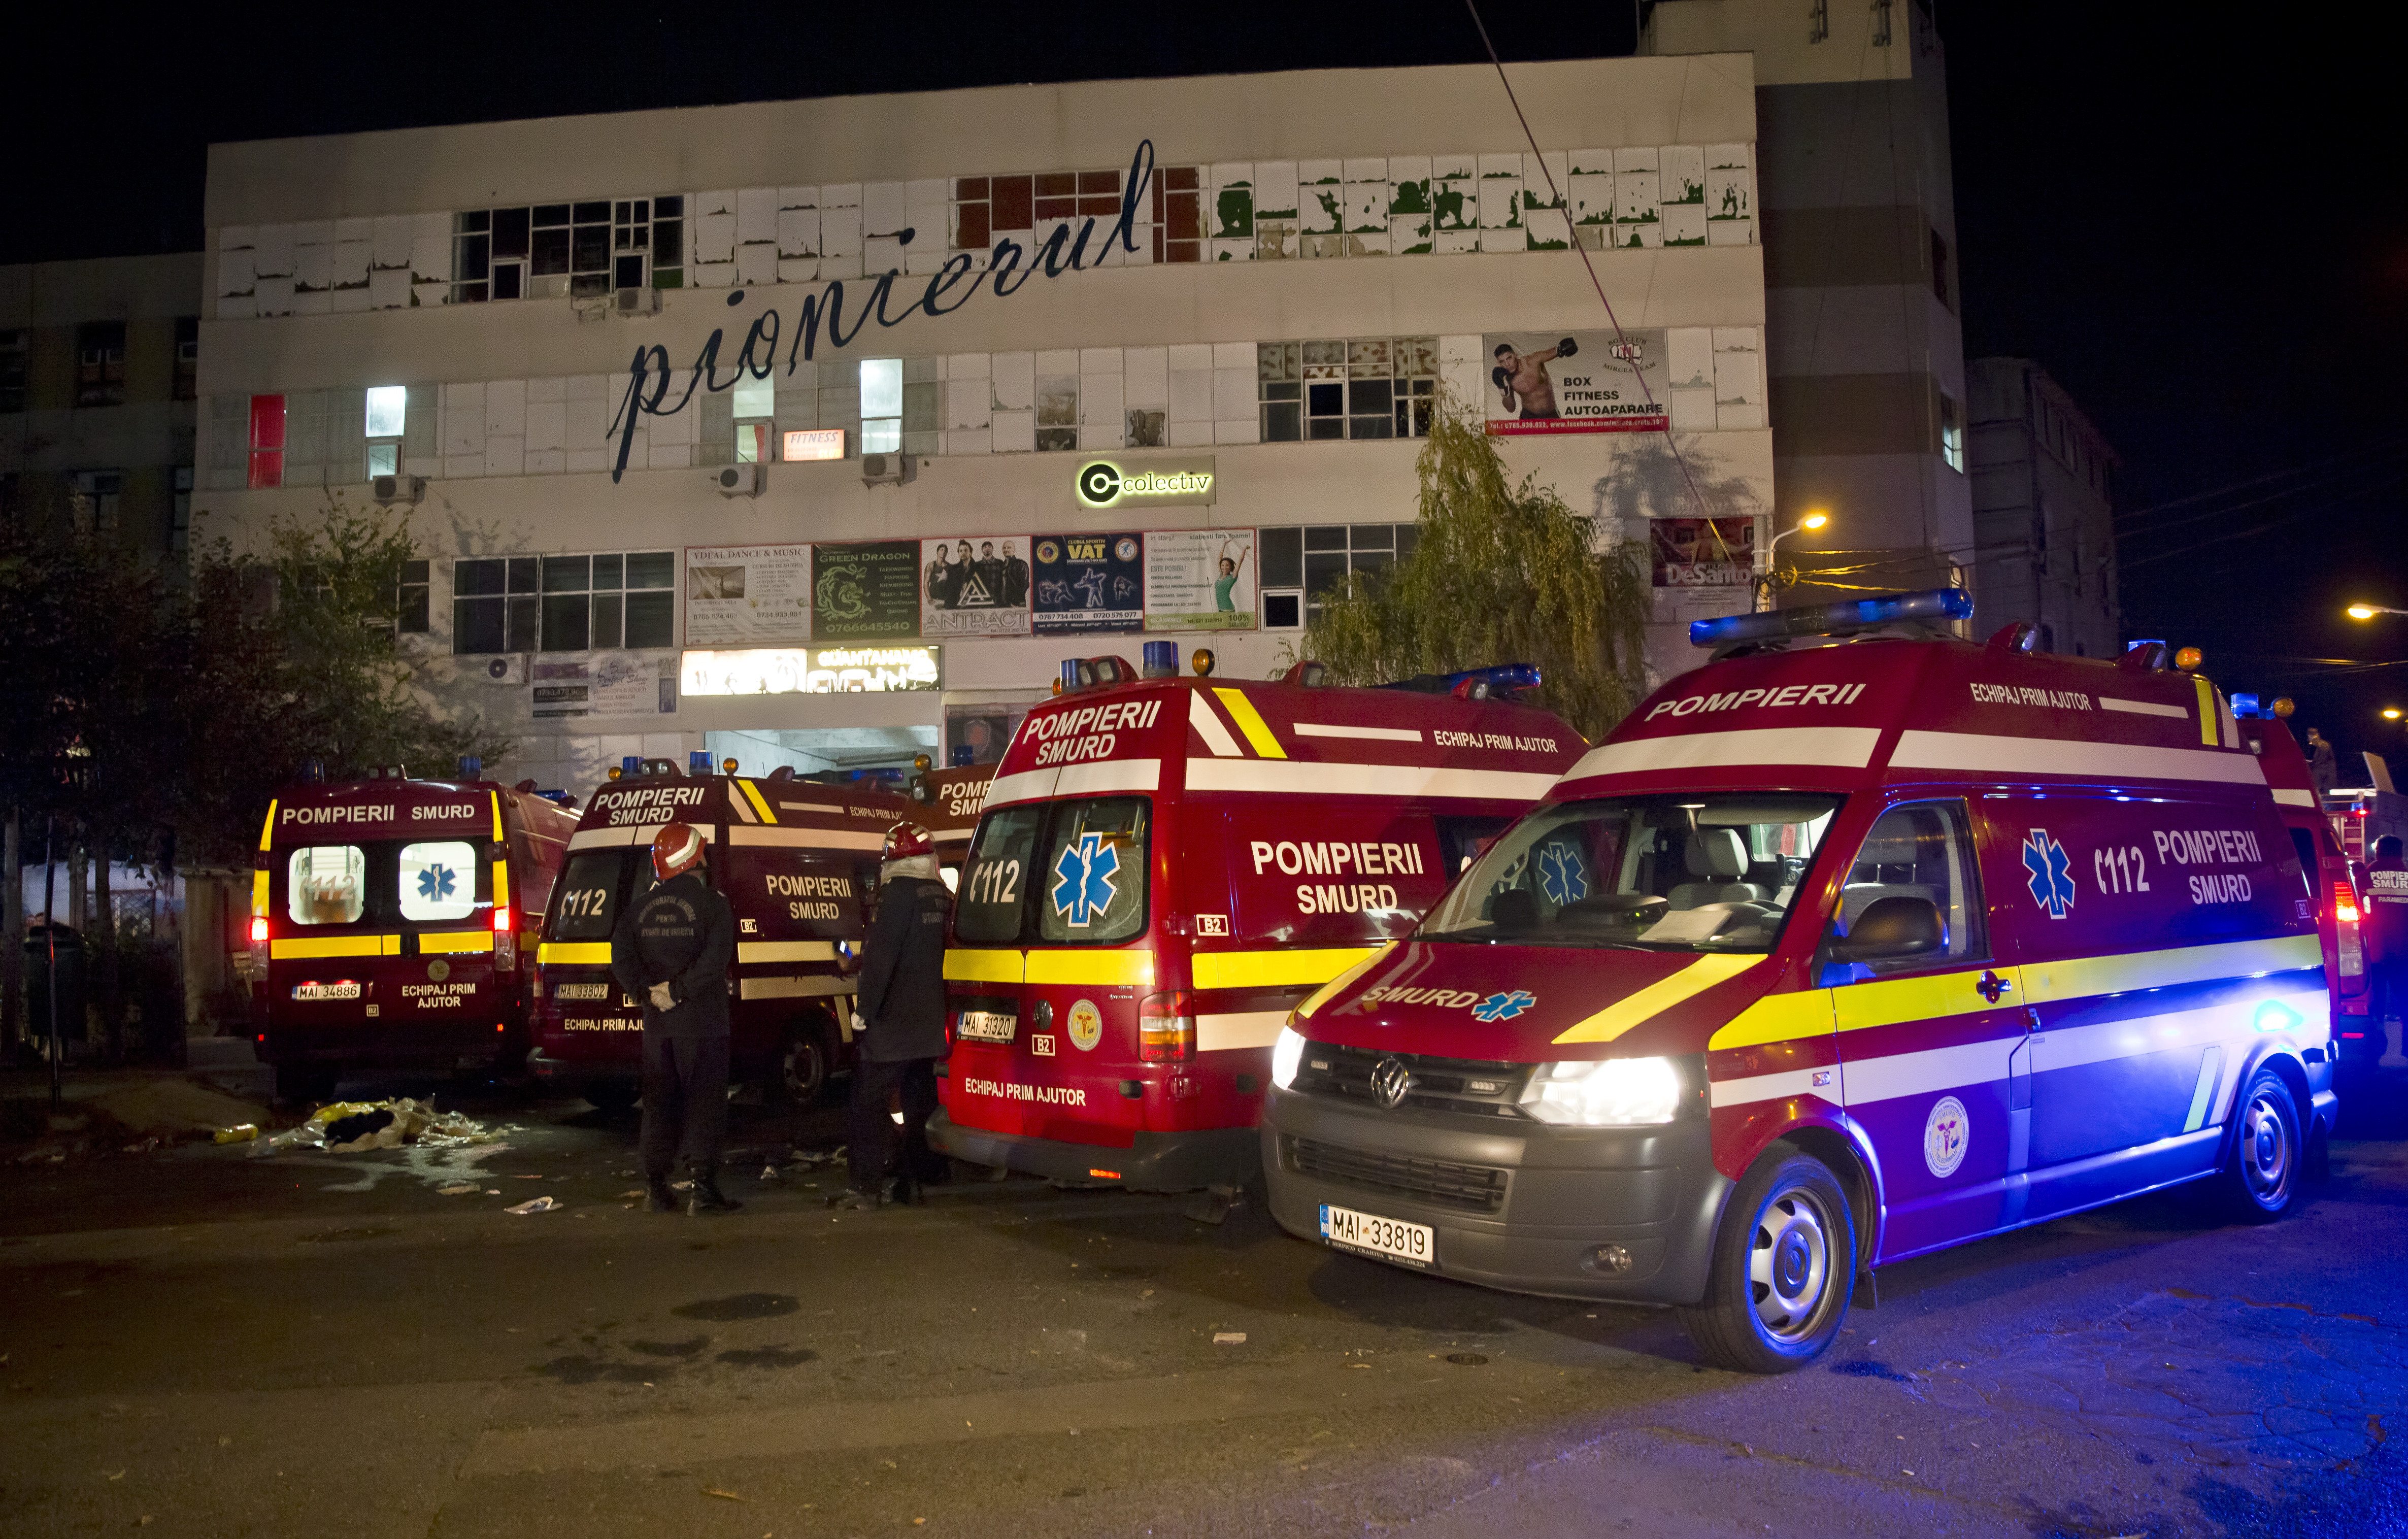 Ambulances are parked outside the site of a fire that occurred in a club, housed by the building in the background, in Bucharest. (Vadim Ghirda—AP)